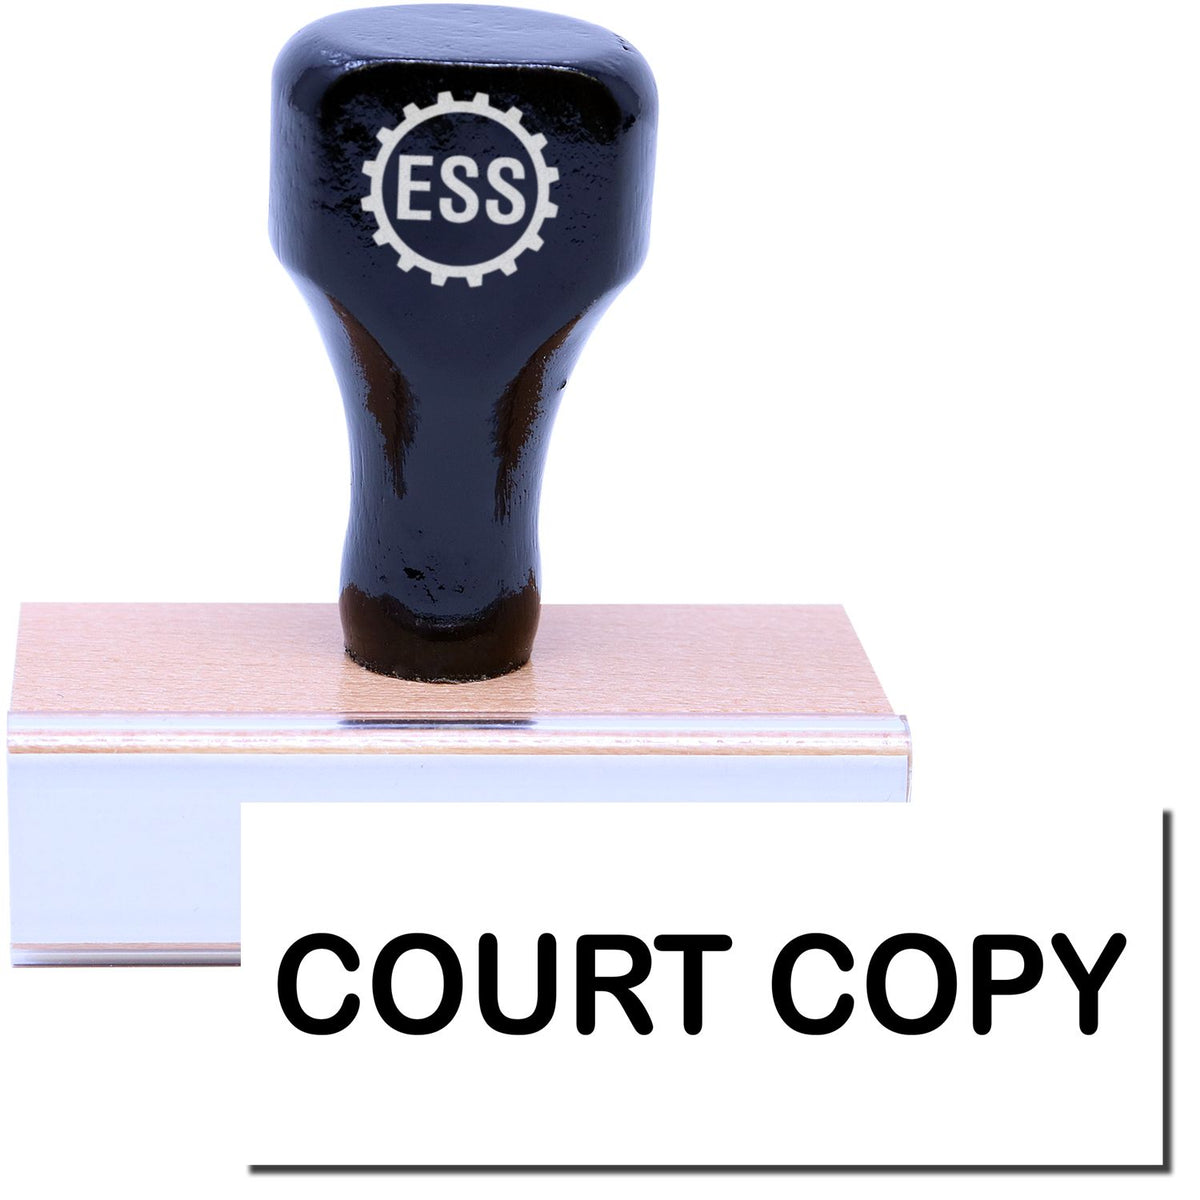 A stock office legal rubber stamp with a stamped image showing how the text &quot;COURT COPY&quot; is displayed after stamping.